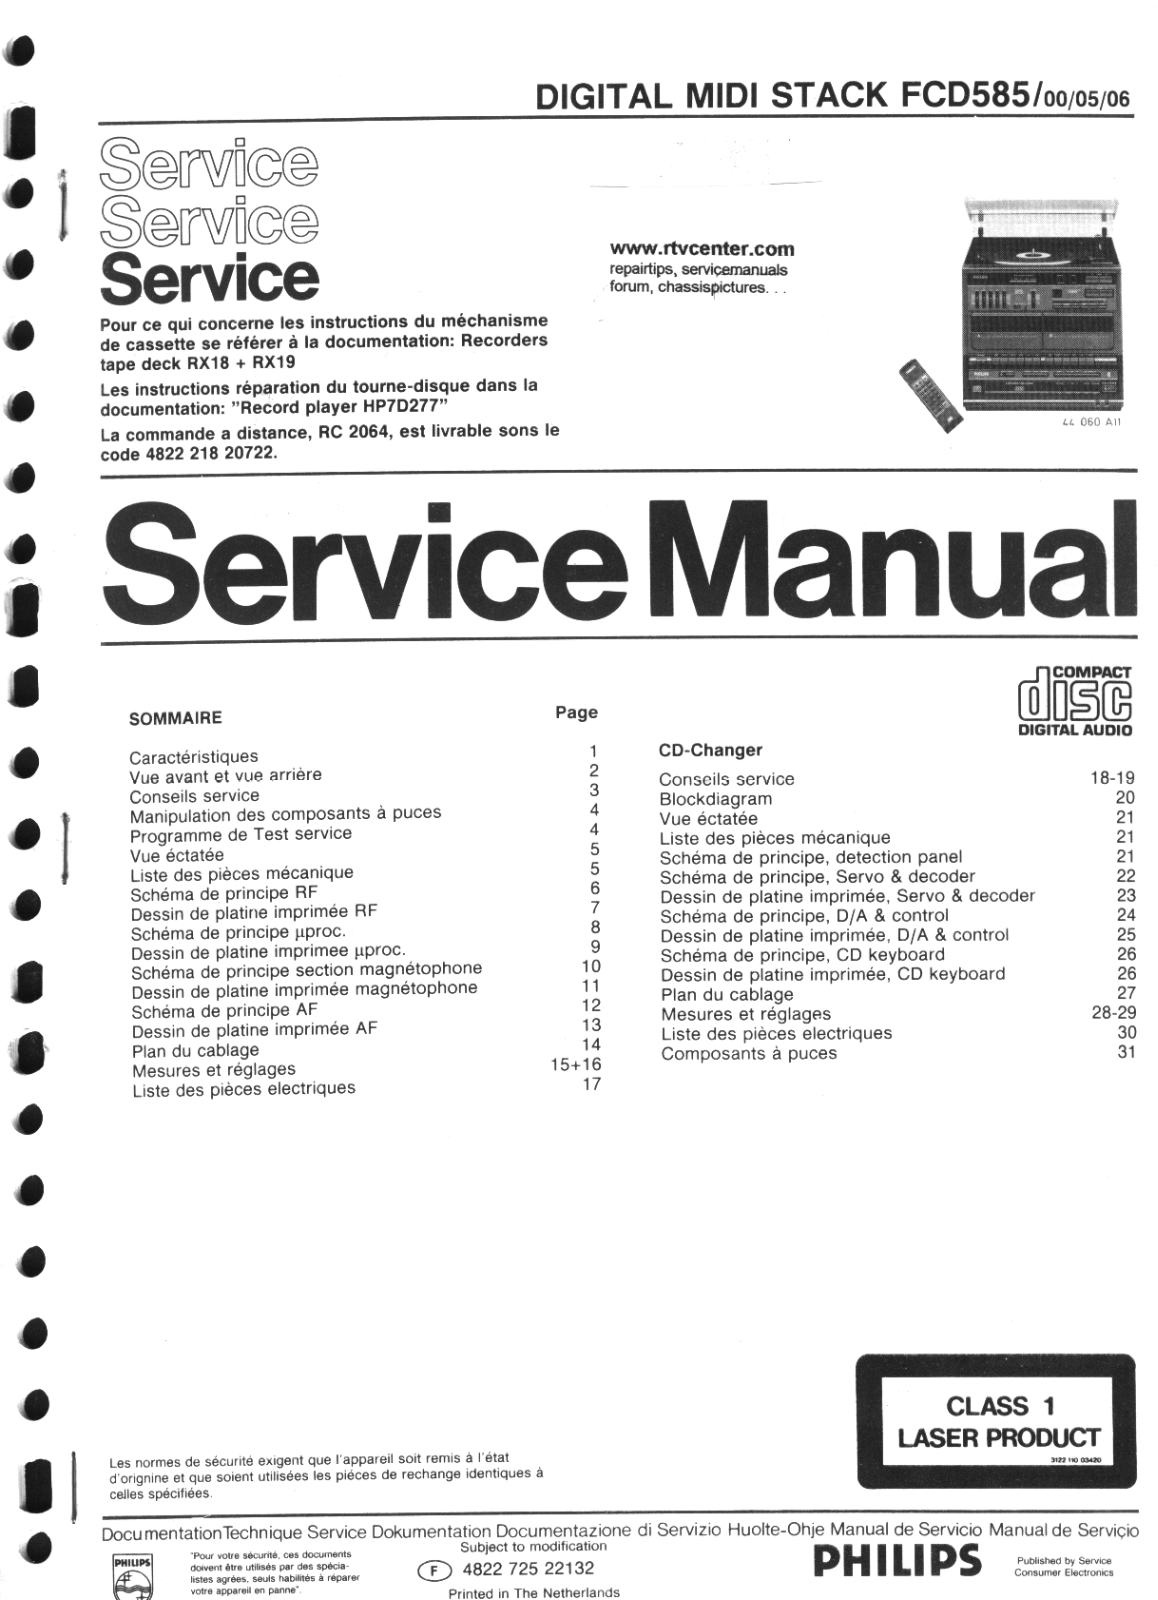 Philips FCD-585 Service manual